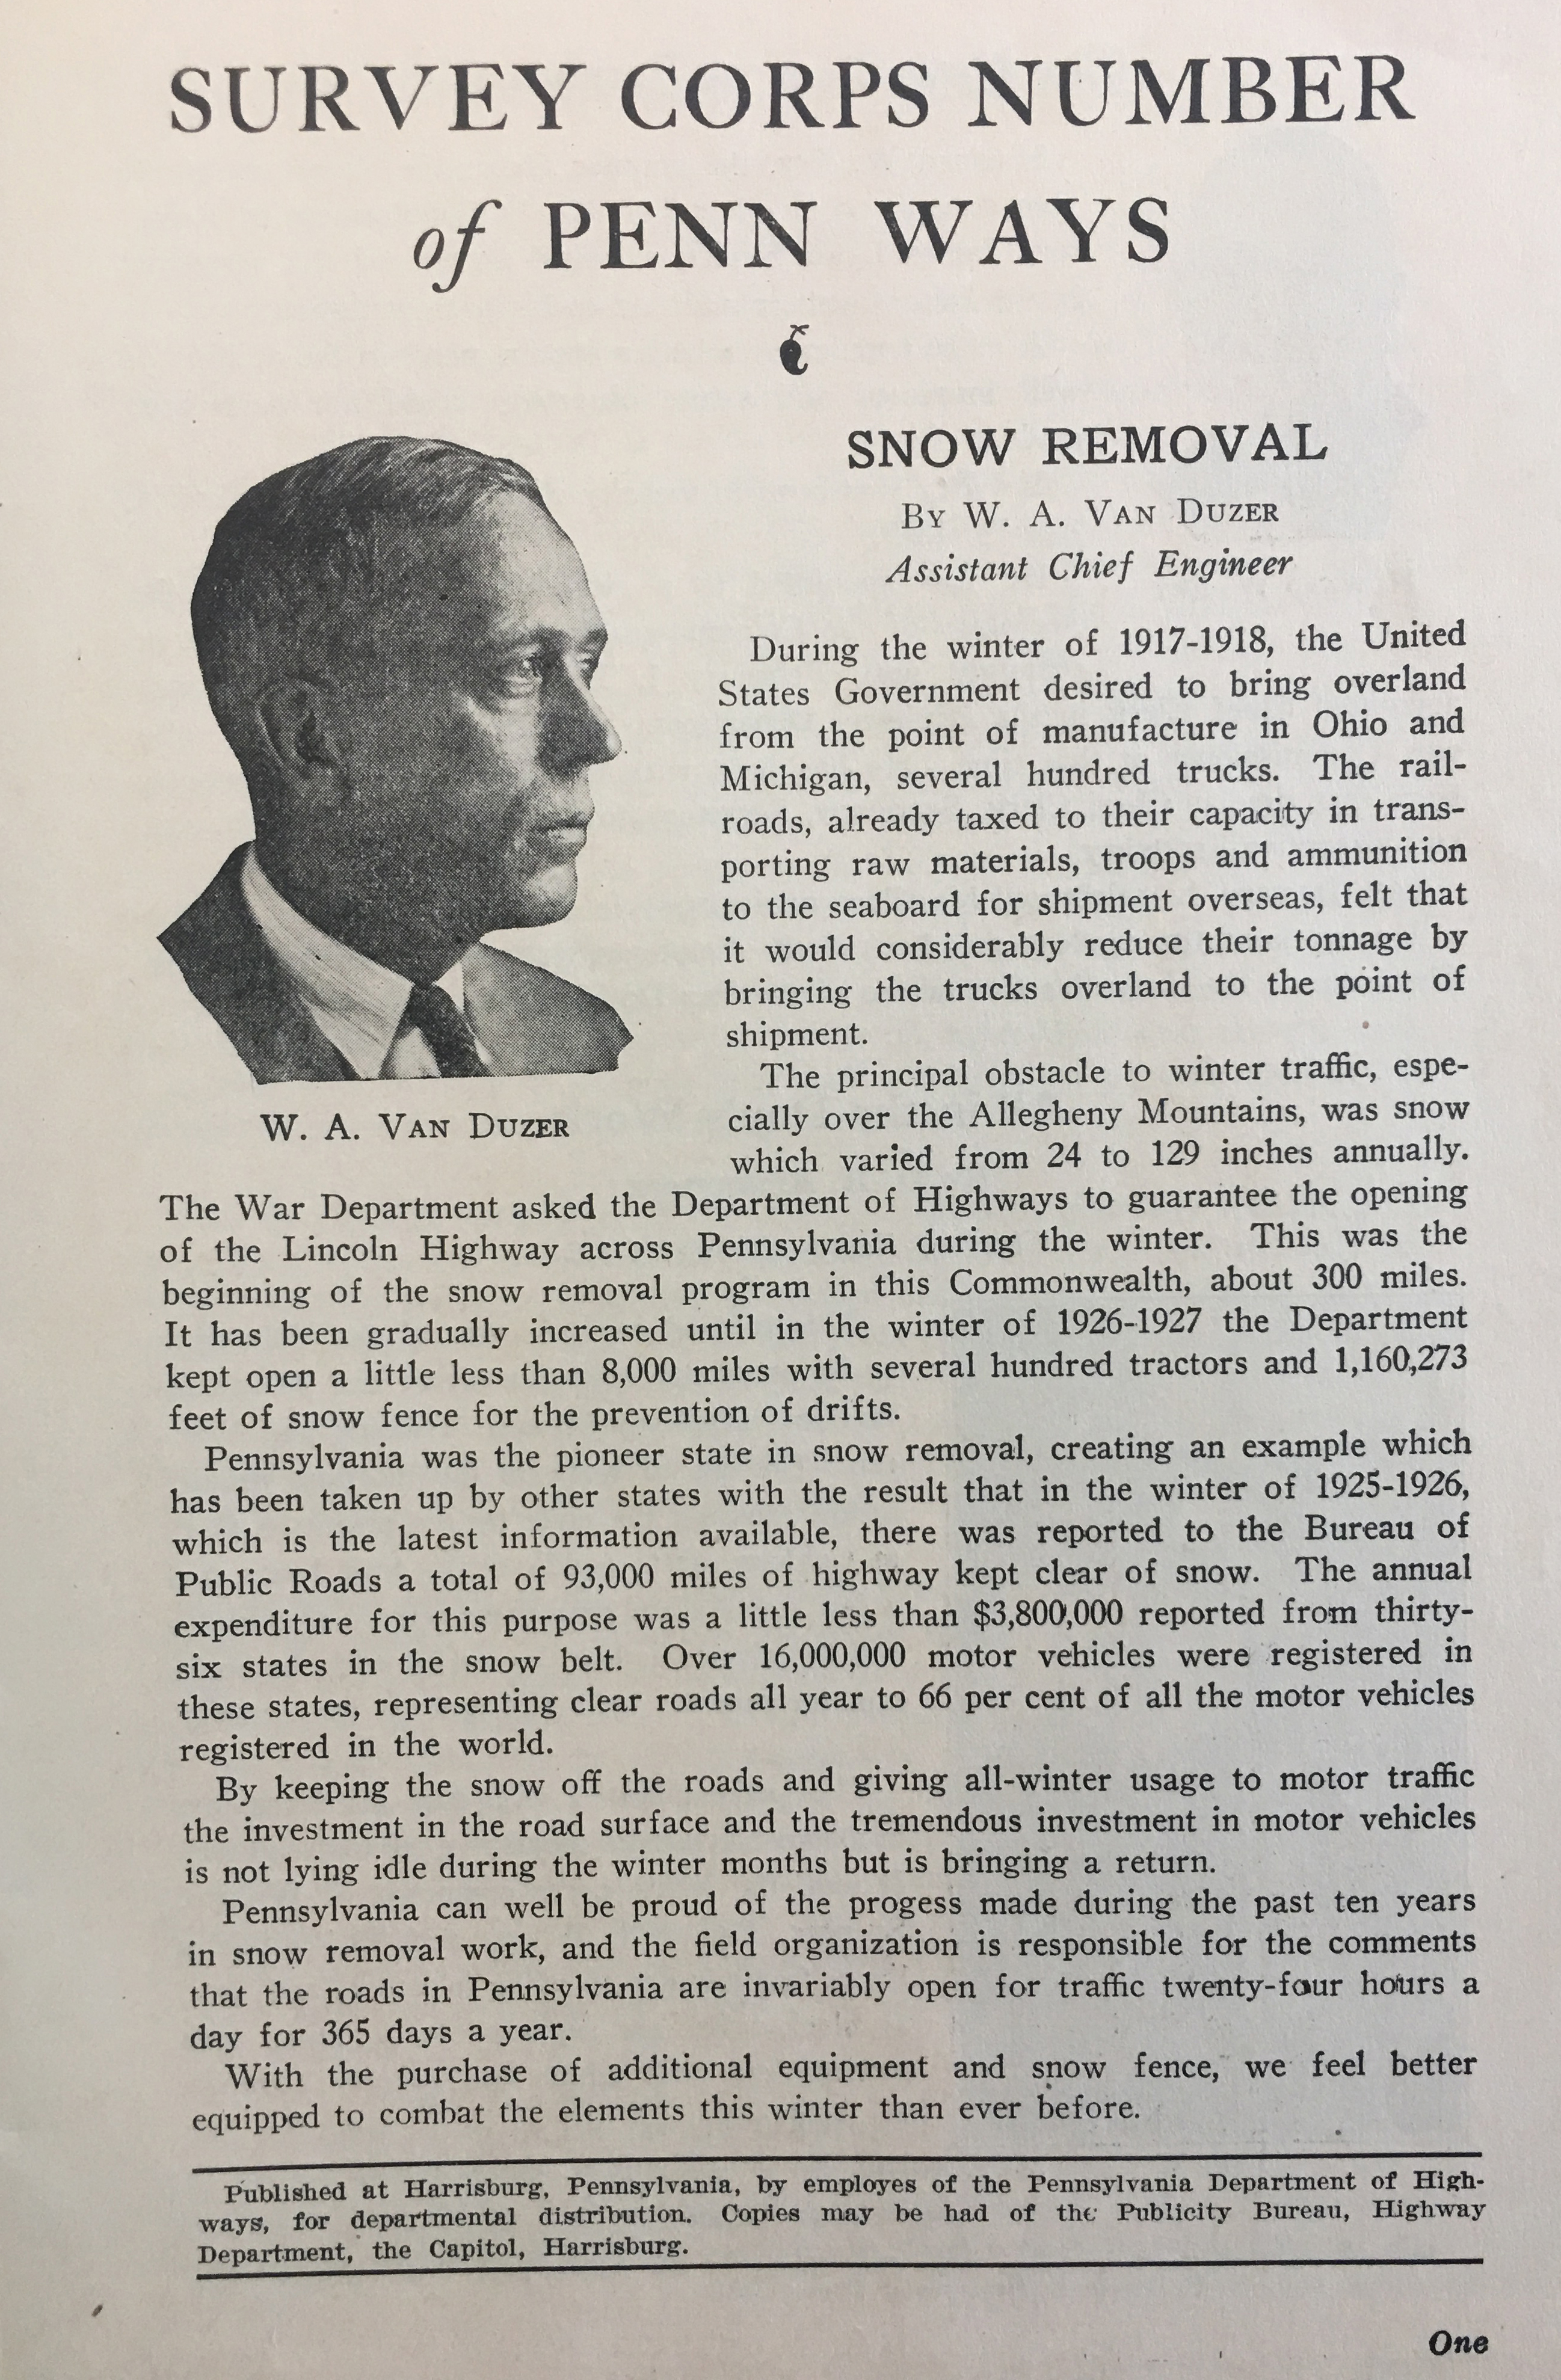 article from 1928 explaining origins of snow removal in PA